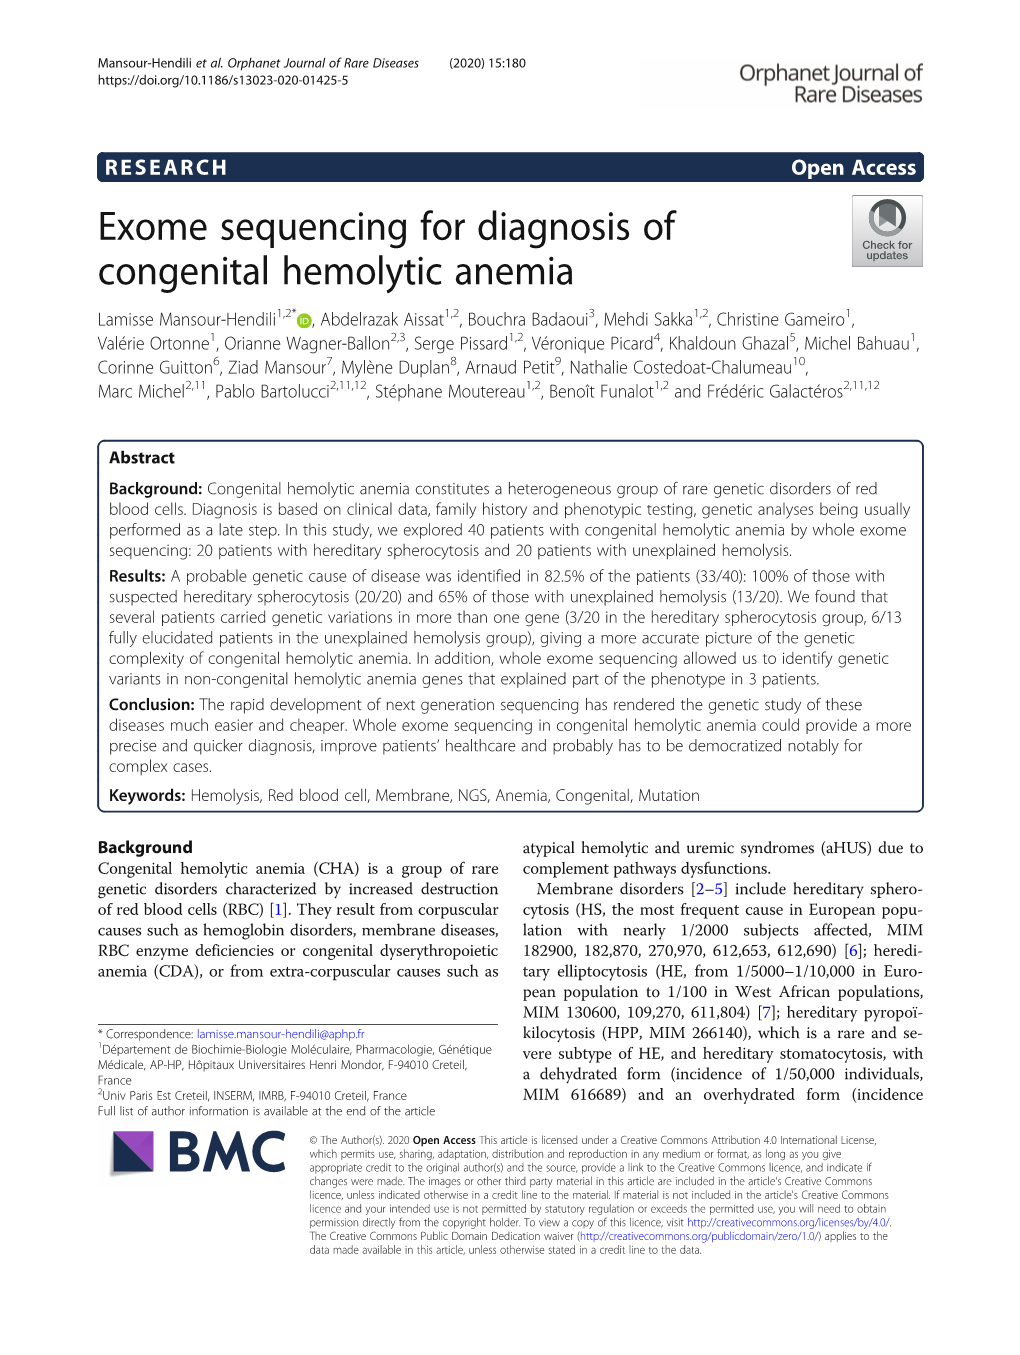 Exome Sequencing for Diagnosis of Congenital Hemolytic Anemia